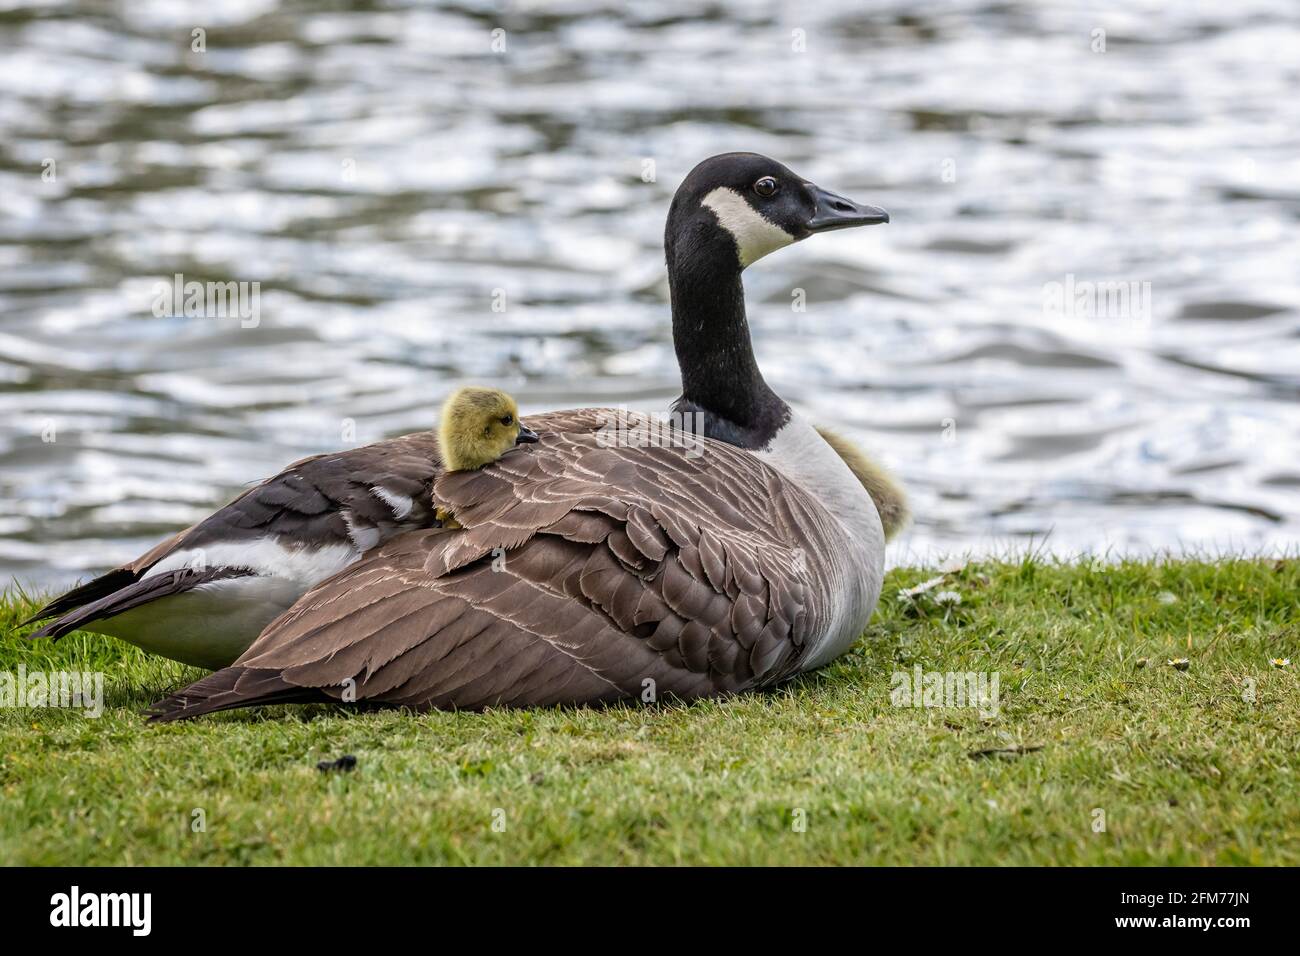 Cute Baby Canada goose with head sticking out from under wings of the mother where it is sheltering Stock Photo